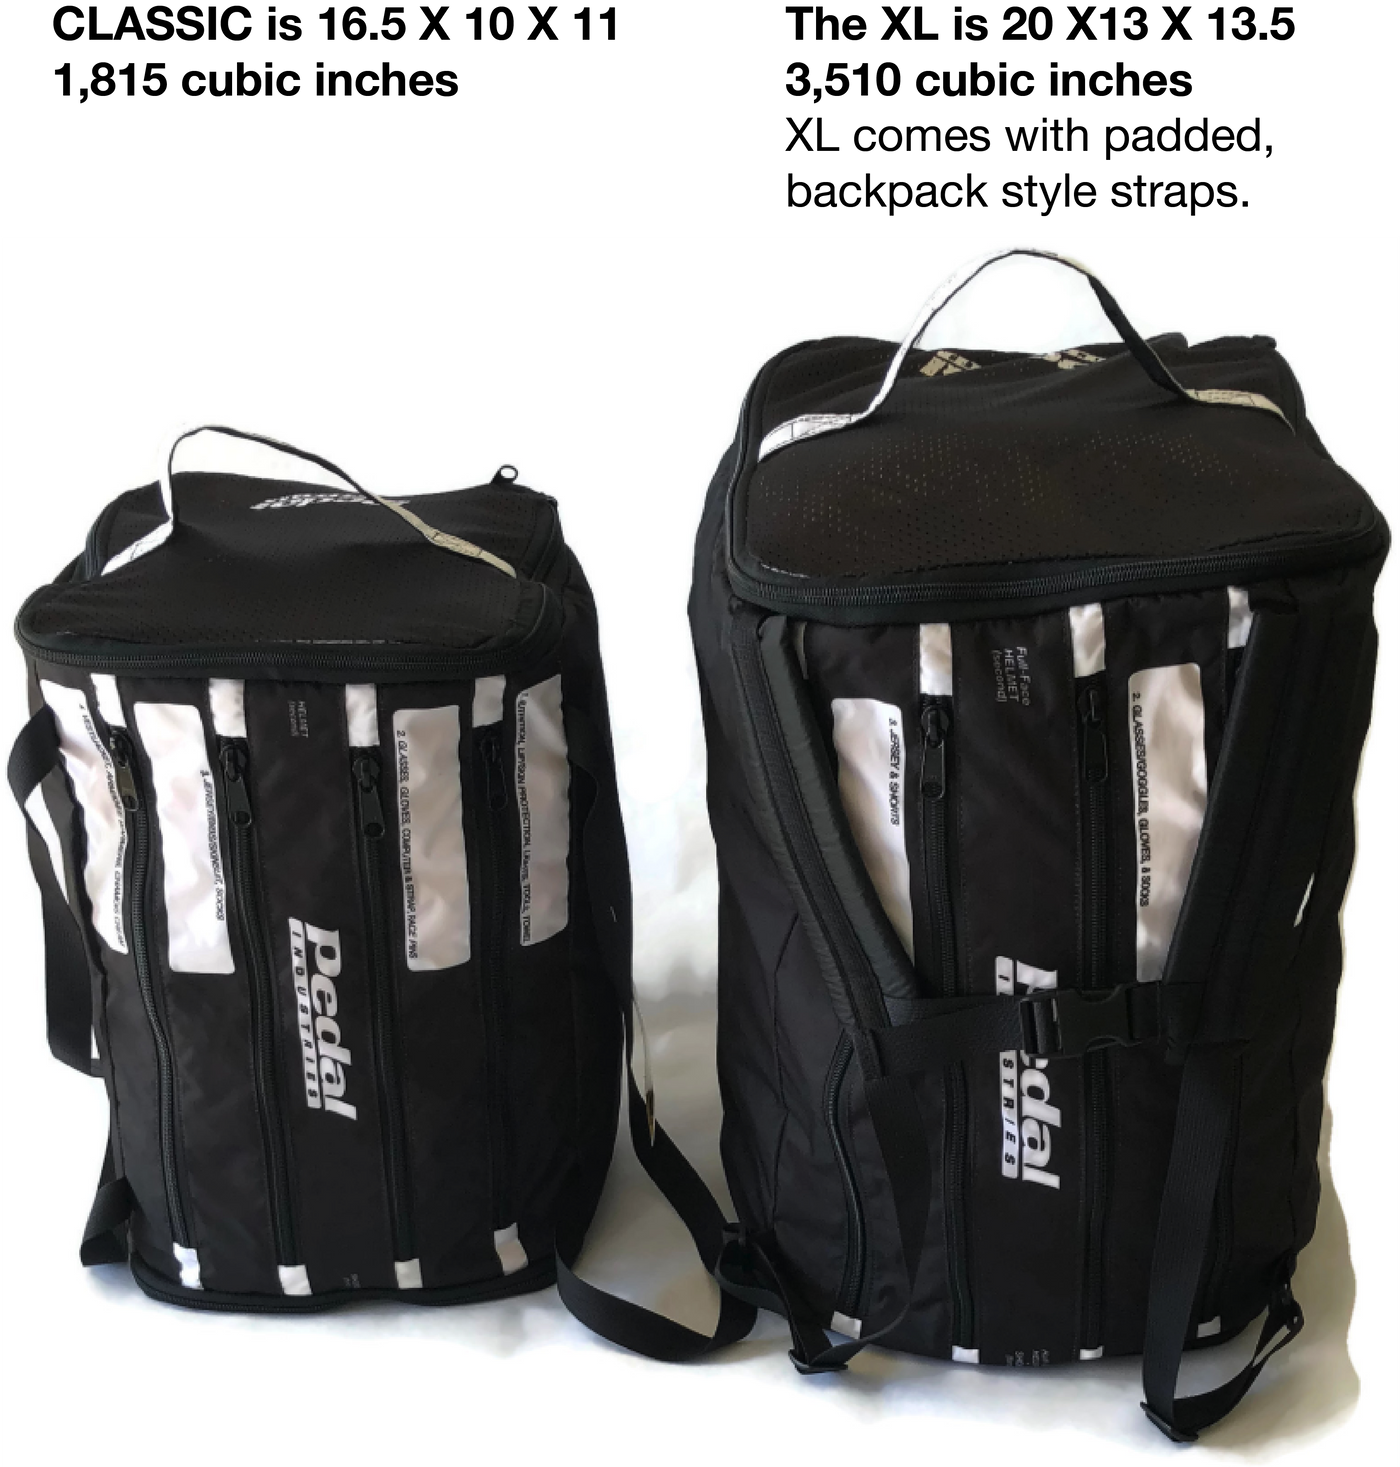 JT Racing RACEDAY BAG - ships in about 3 weeks